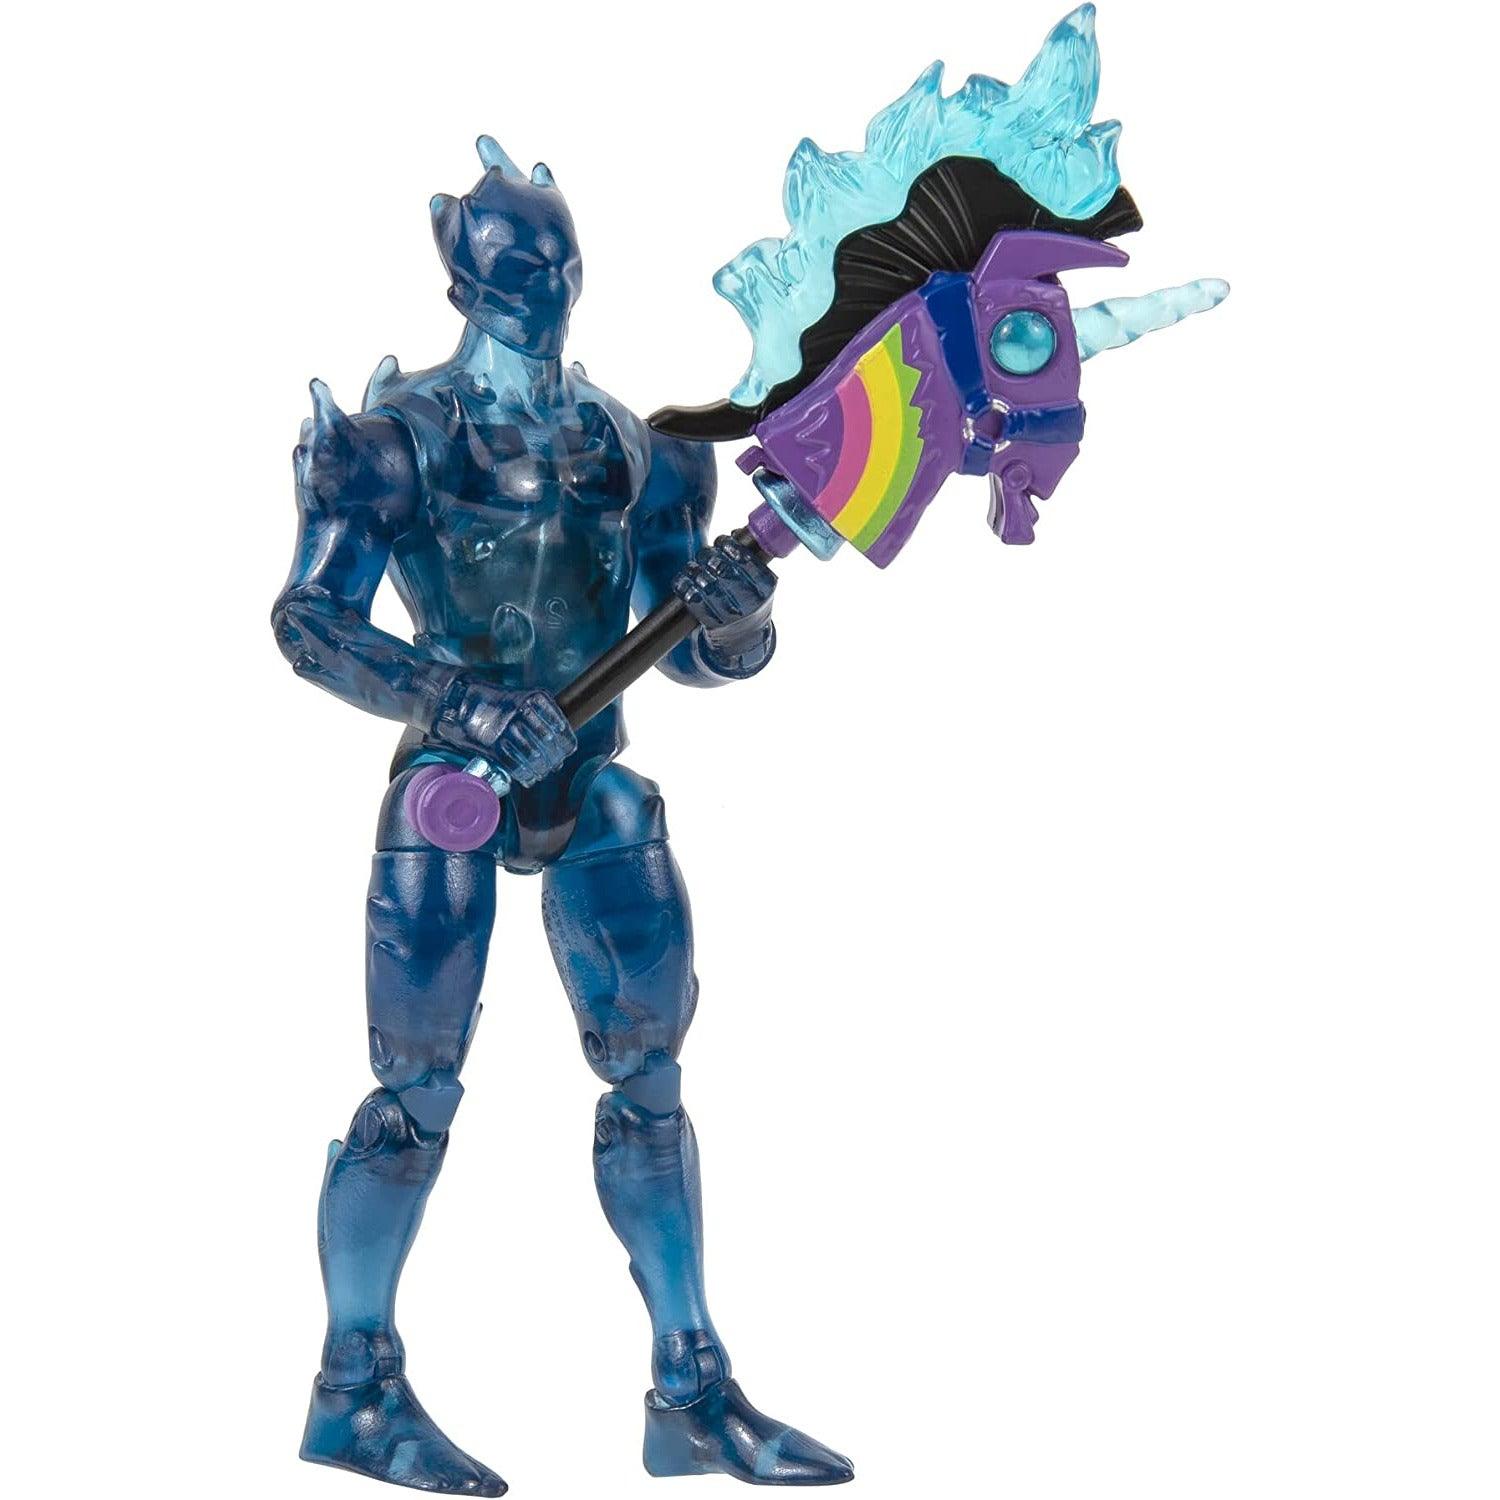 Fortnite Zero (Master Grade) - 4-Inch Articulated Light Up Figure - BumbleToys - 8+ Years, 8-13 Years, Action Battling, Action Figures, Boys, Figures, Fortnite, OXE, Pre-Order